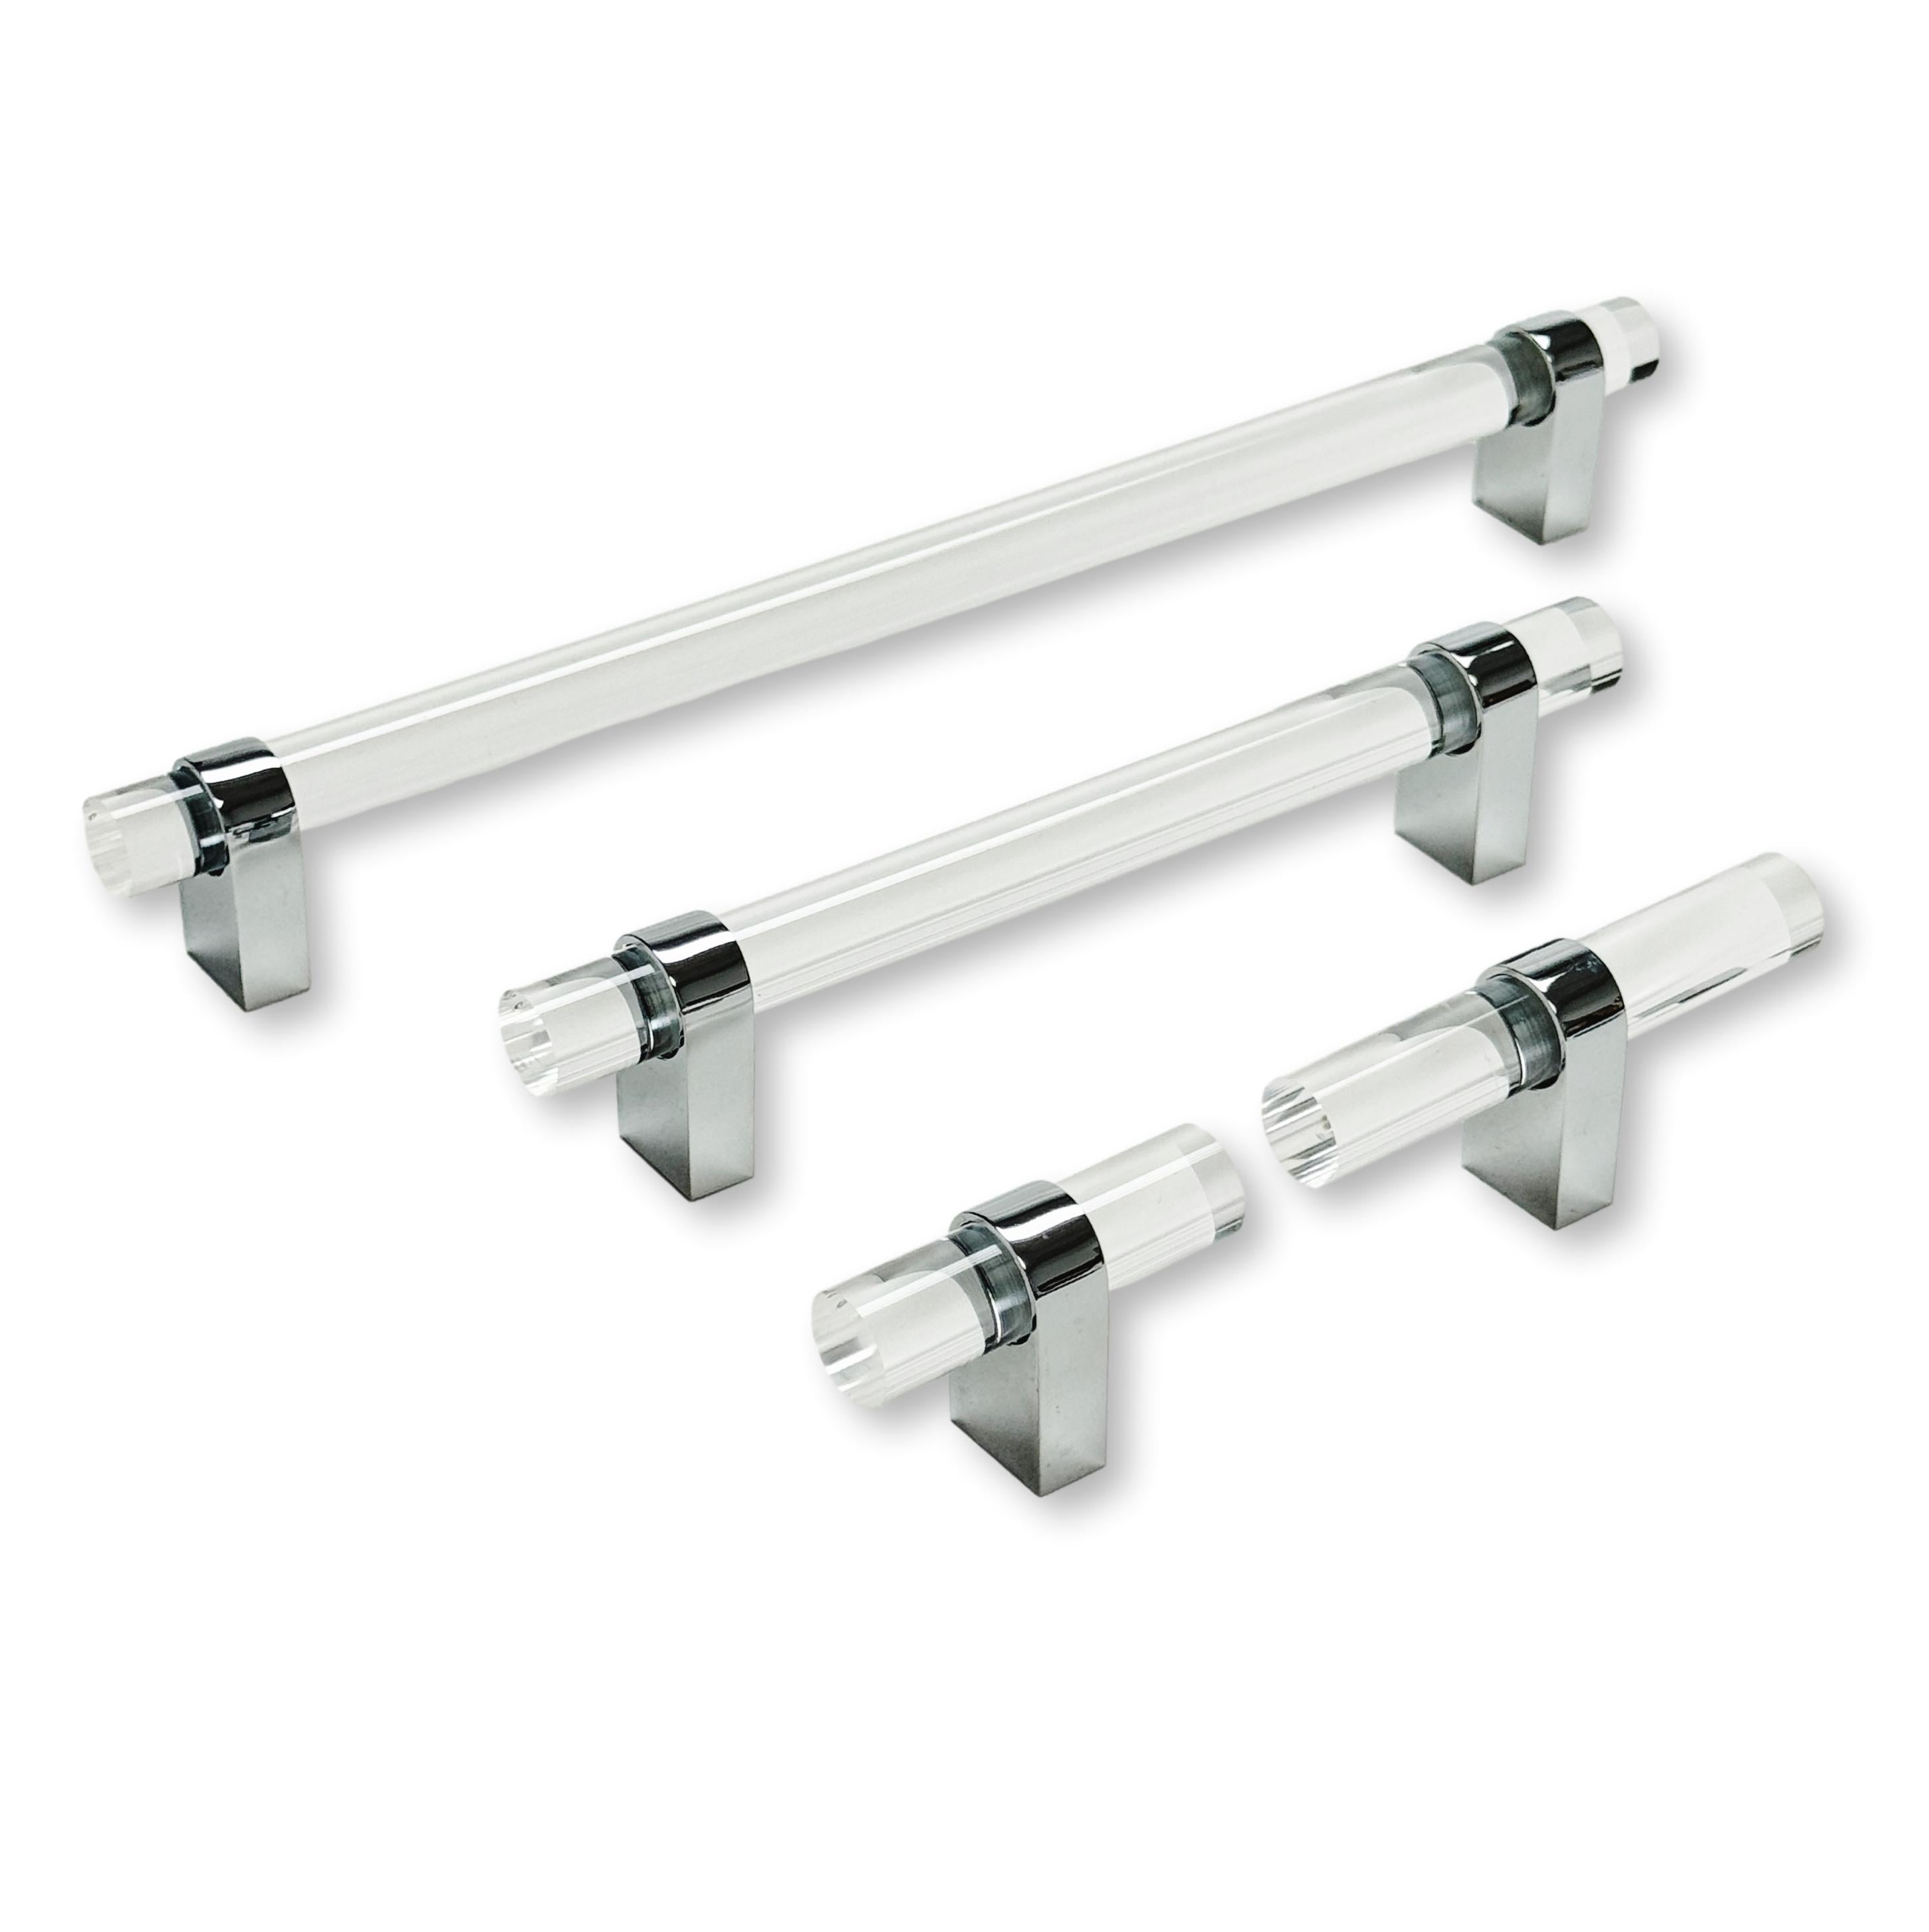 Lucite "June" Polished Chrome Drawer Pulls and Knobs - Industry Hardware